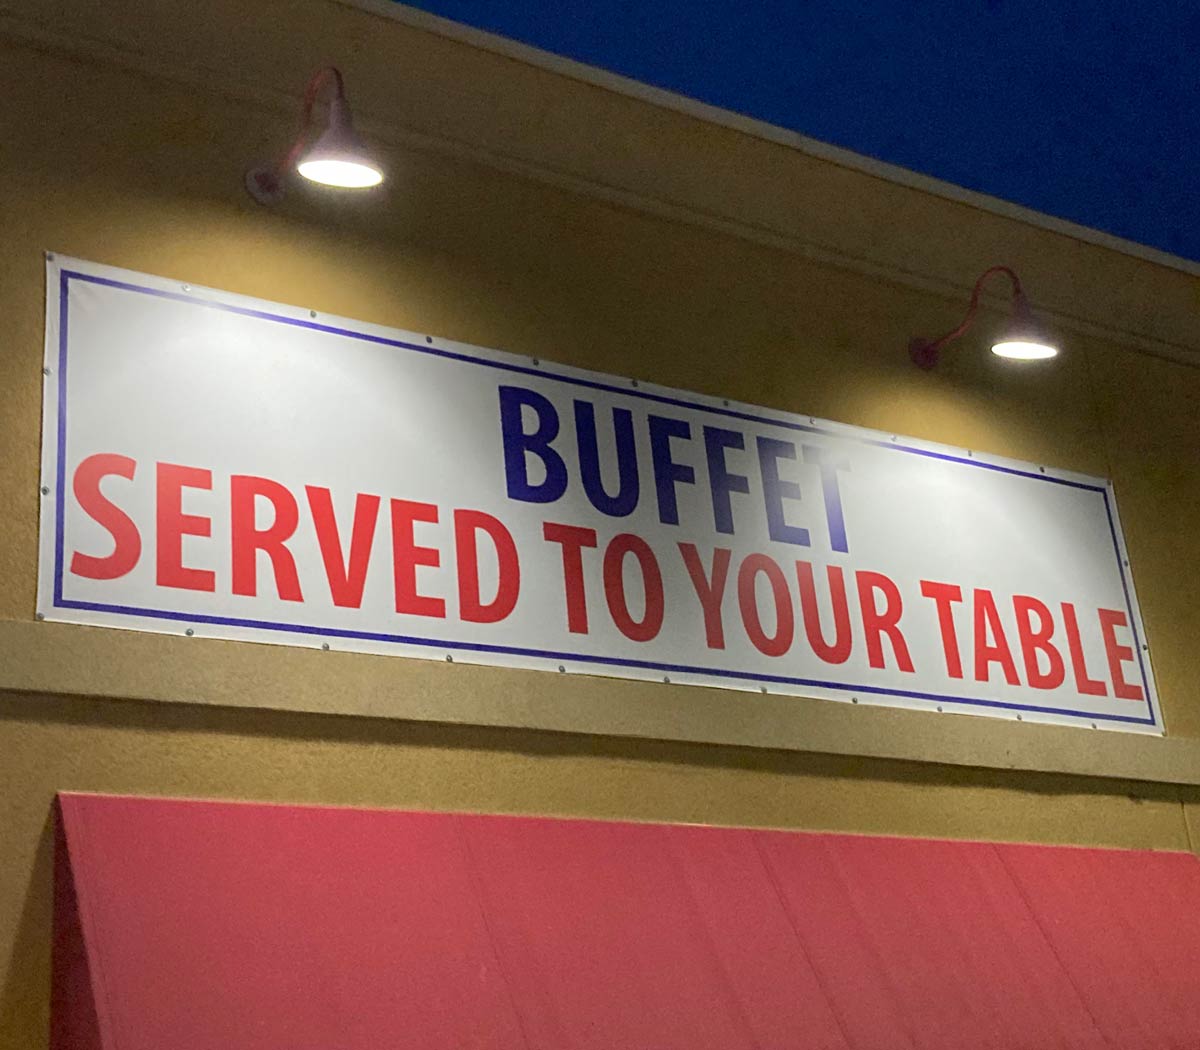 A new type of dining experience